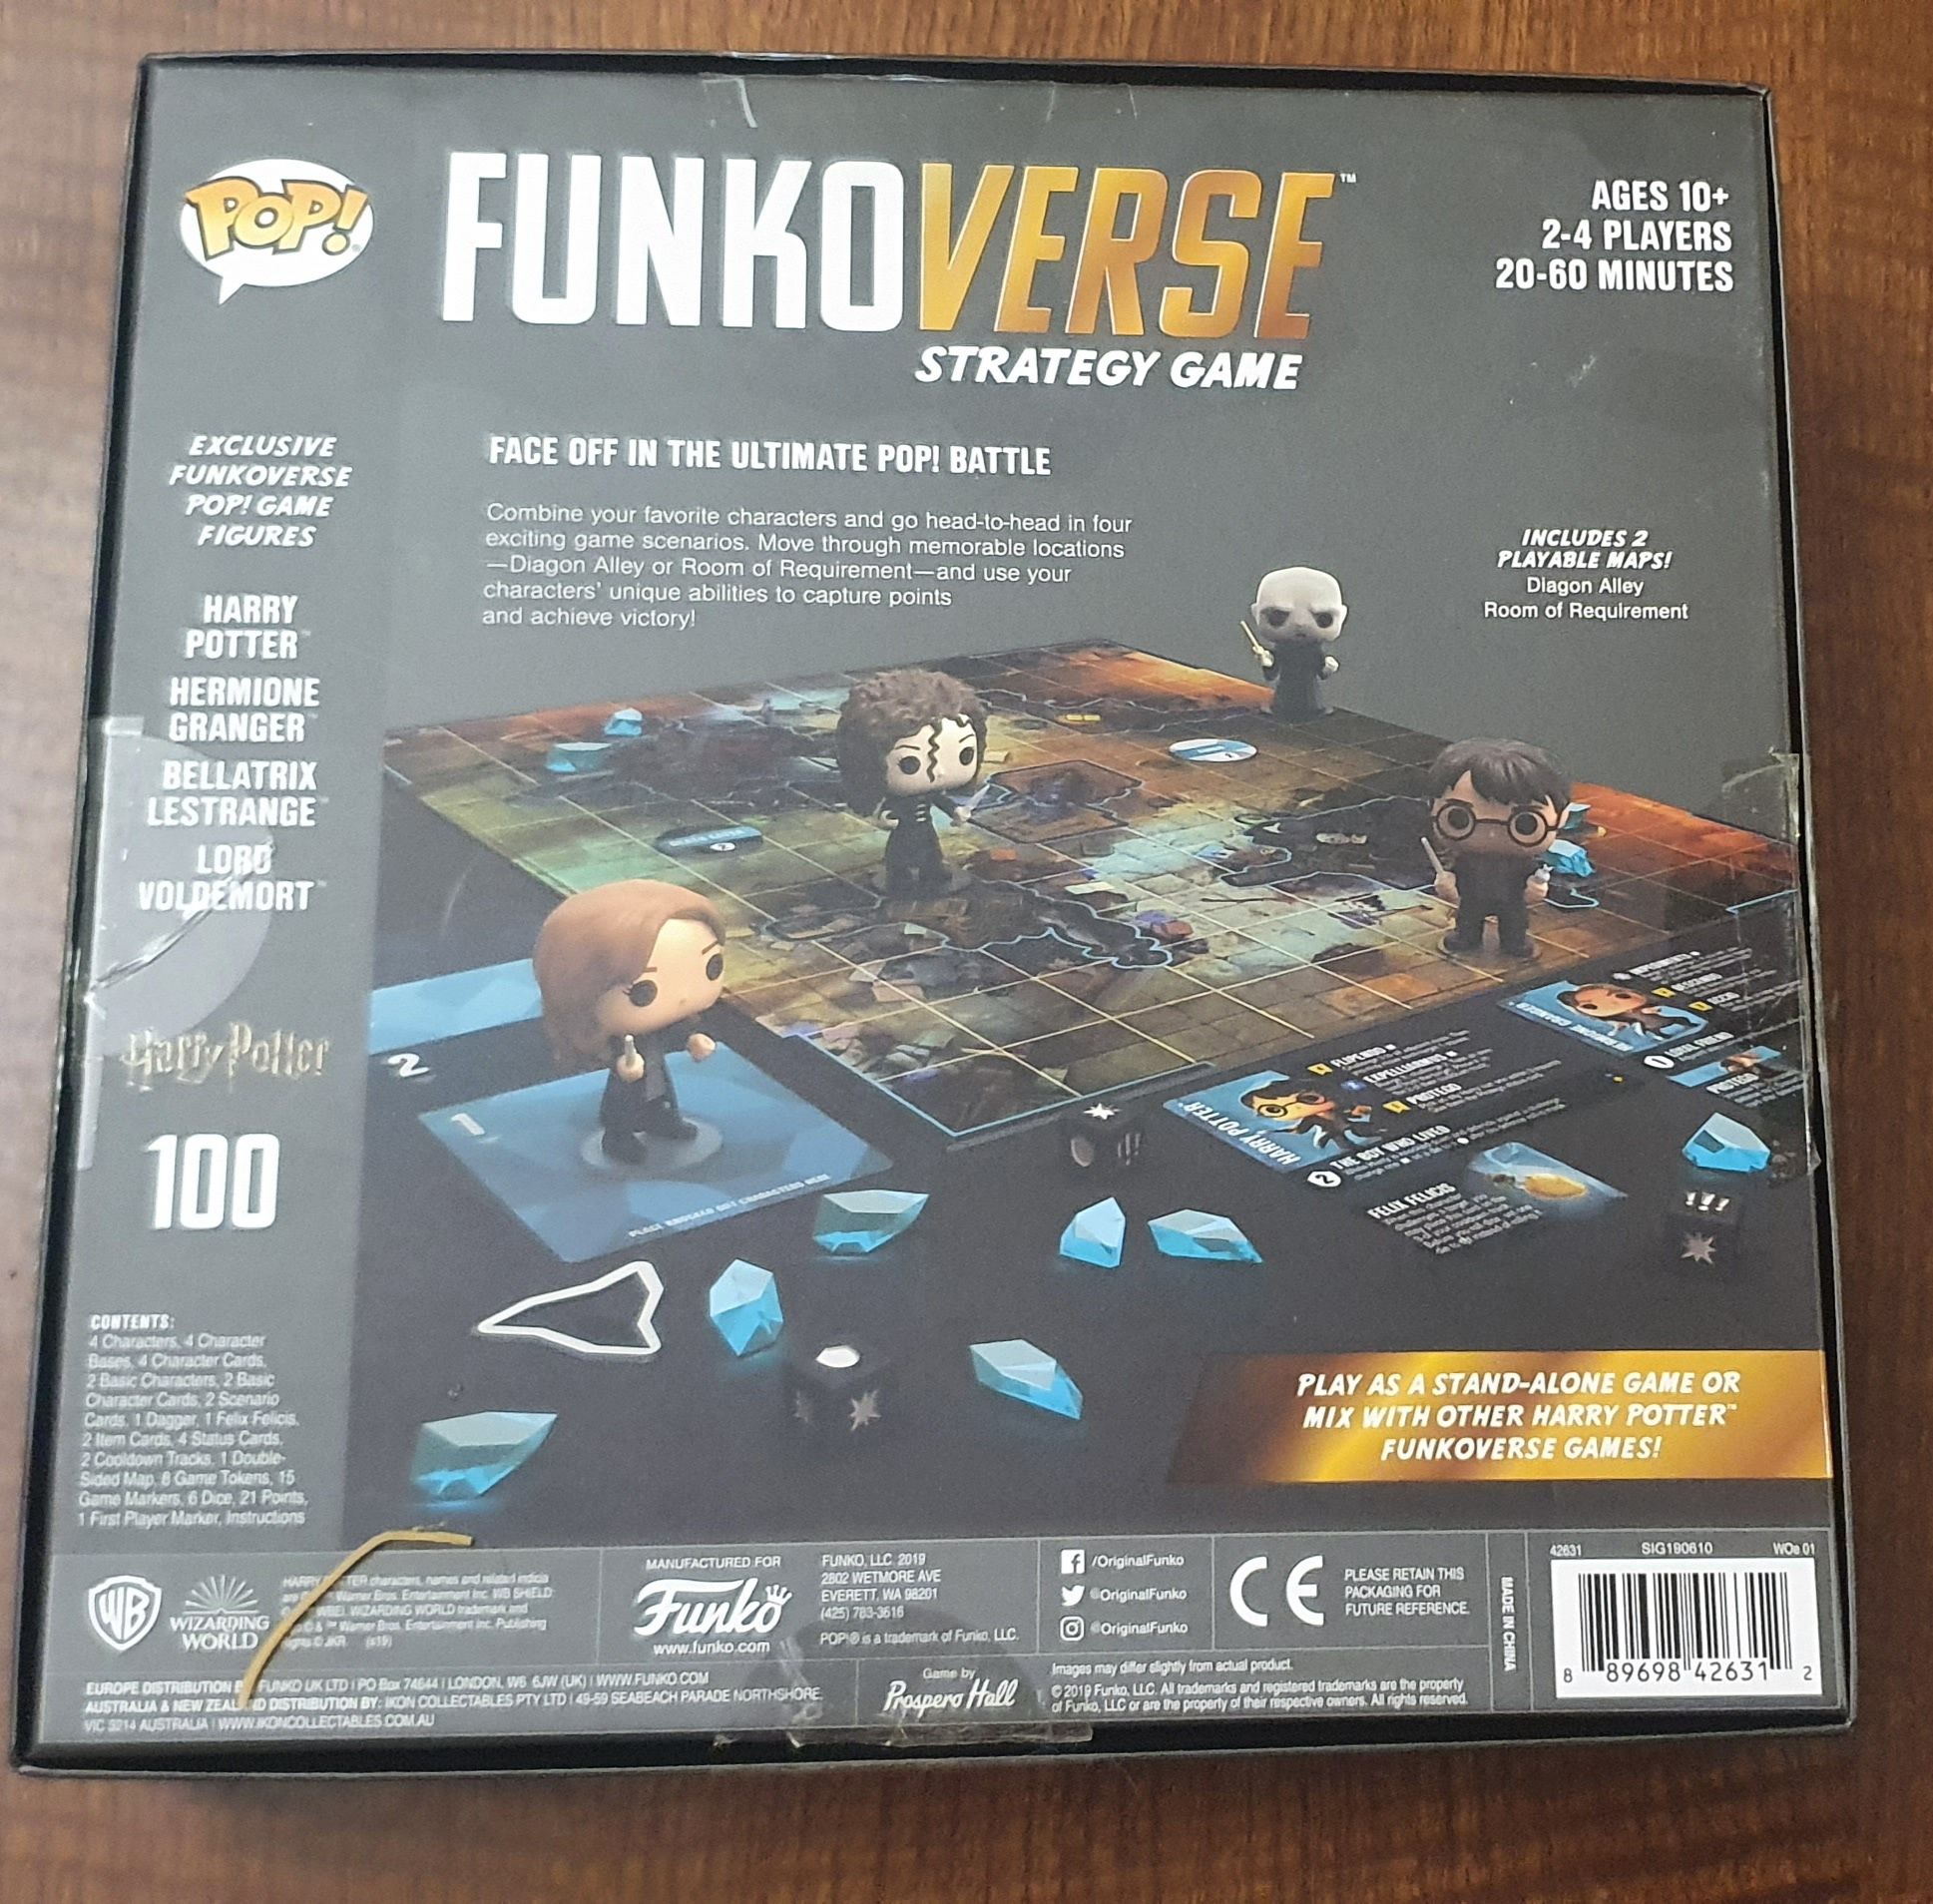 Harry Potter Funko Verse Strategy Game